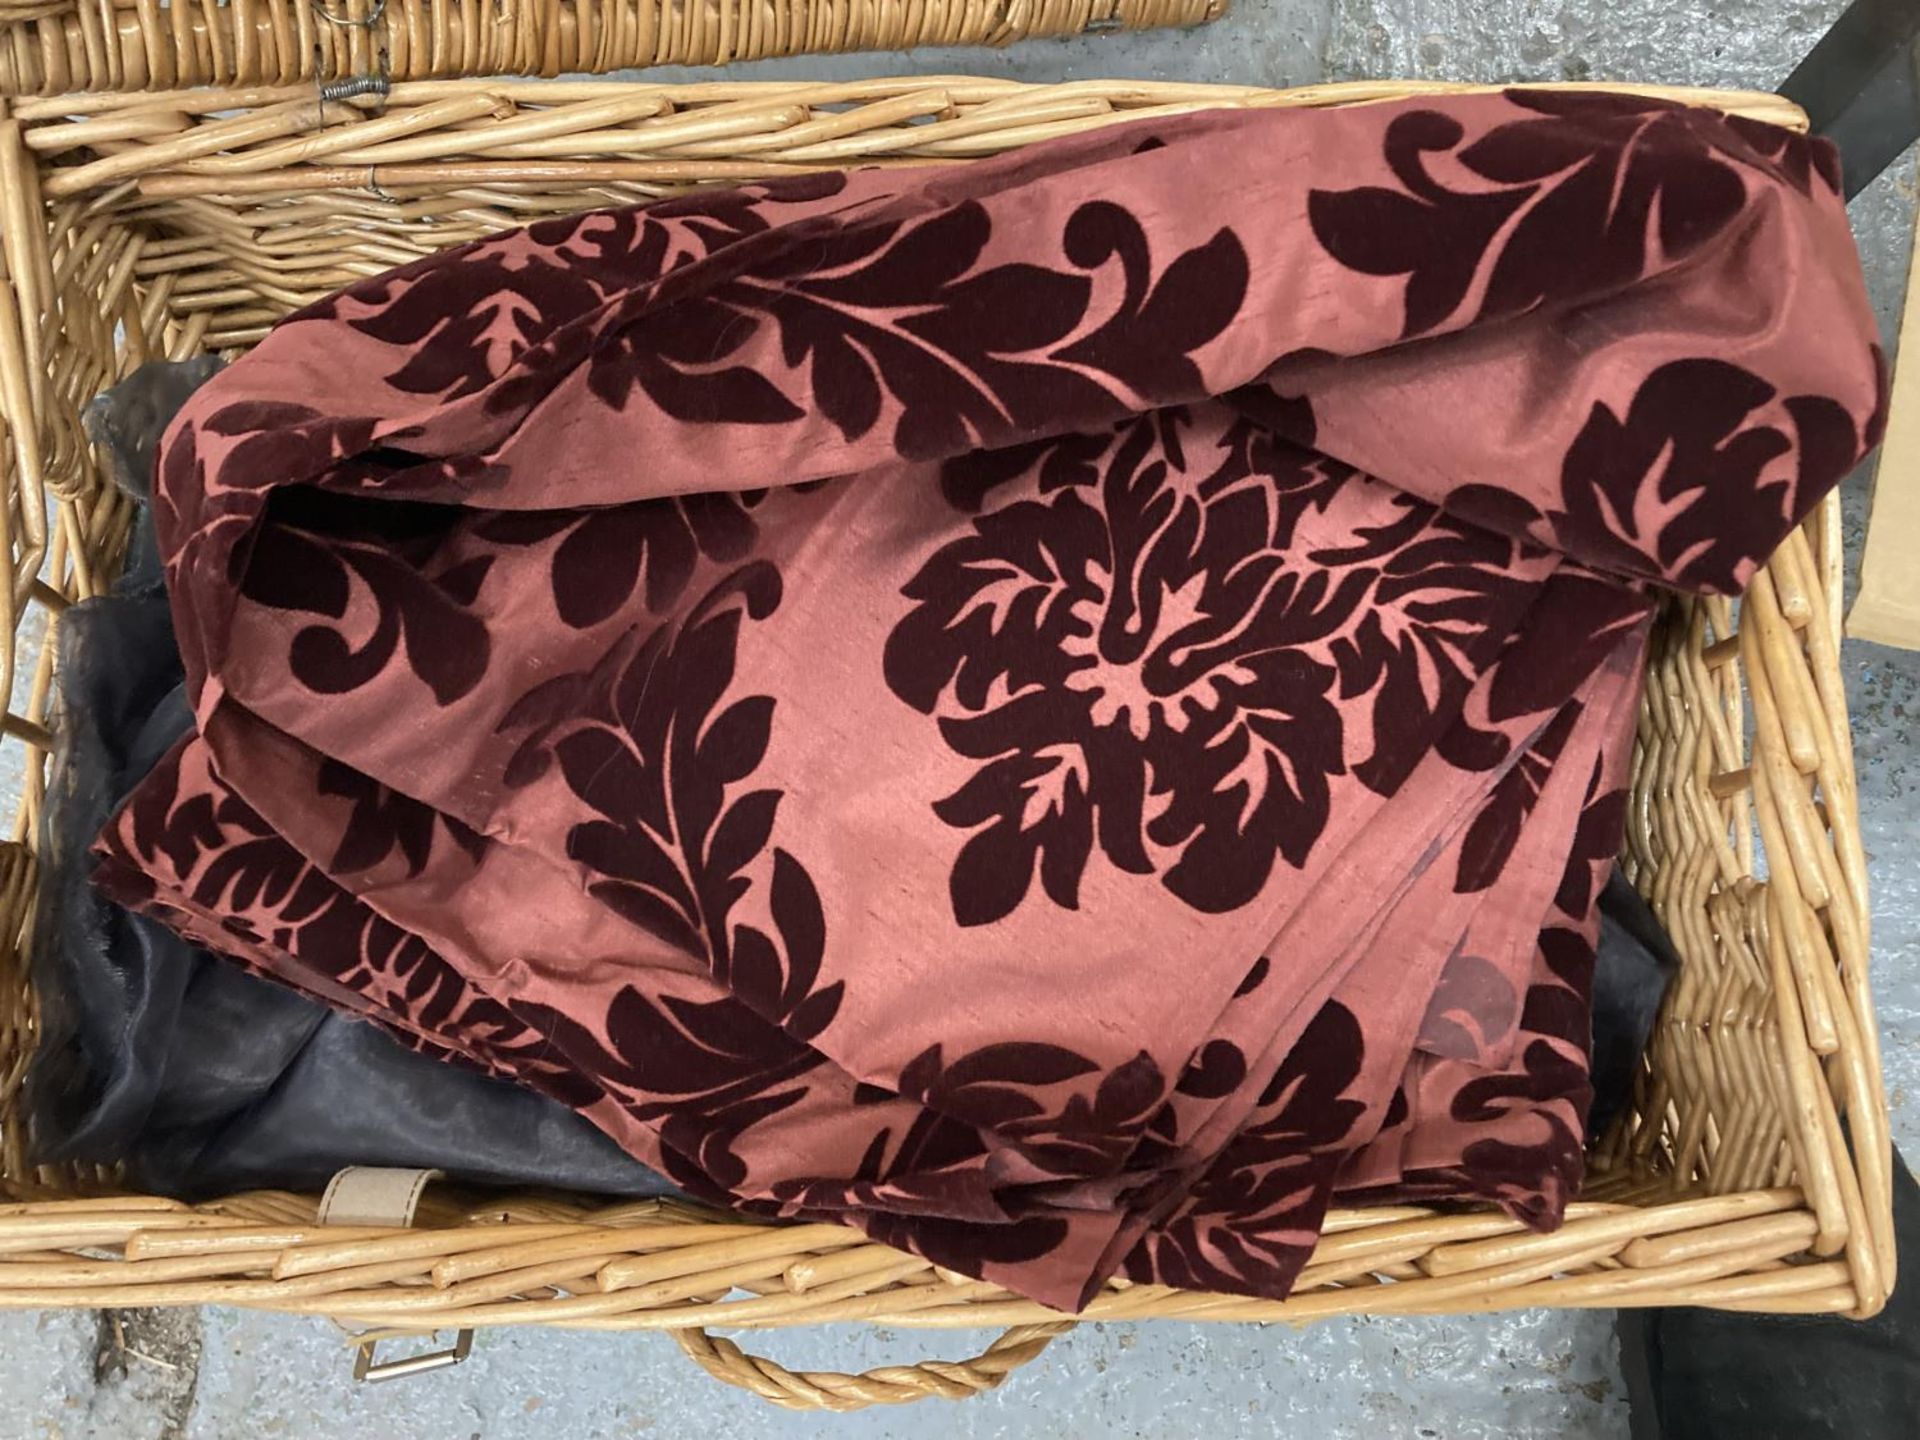 A WICKER PICNIC BASKET CONTAINING MATERIAL - Image 2 of 3